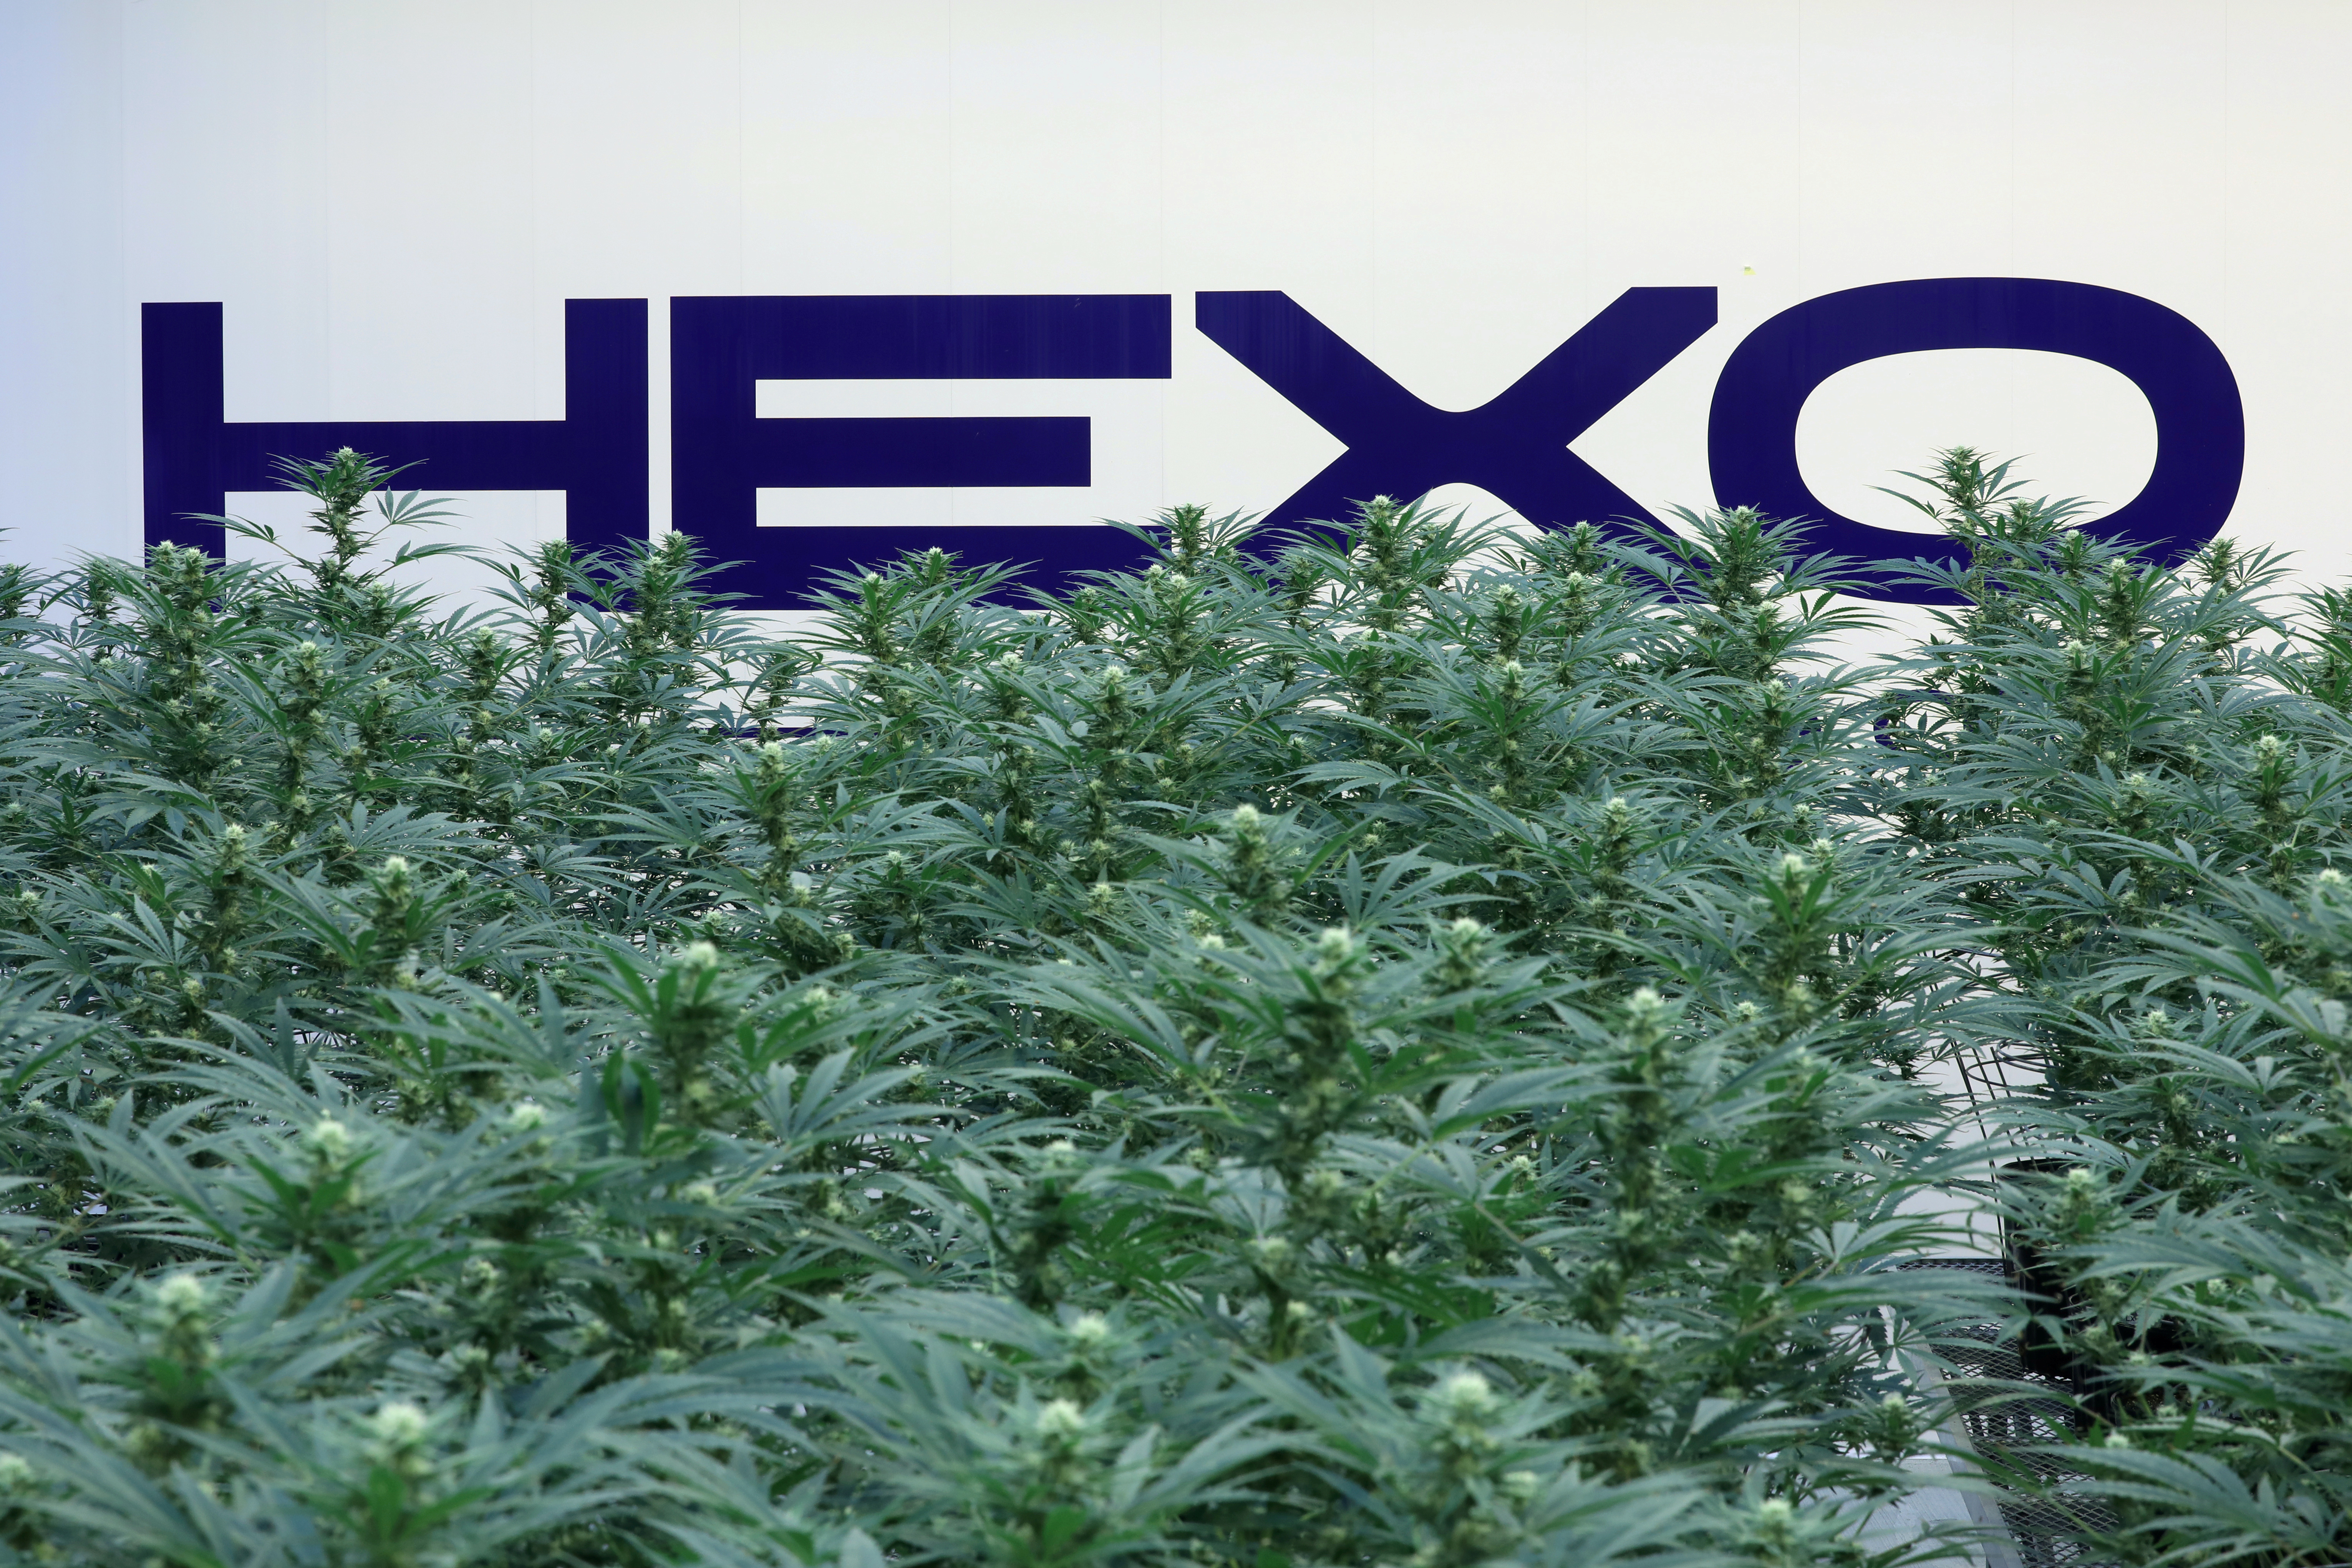 A Hexo Corp logo is pictured behind cannabis plants at their facilities in Gatineau